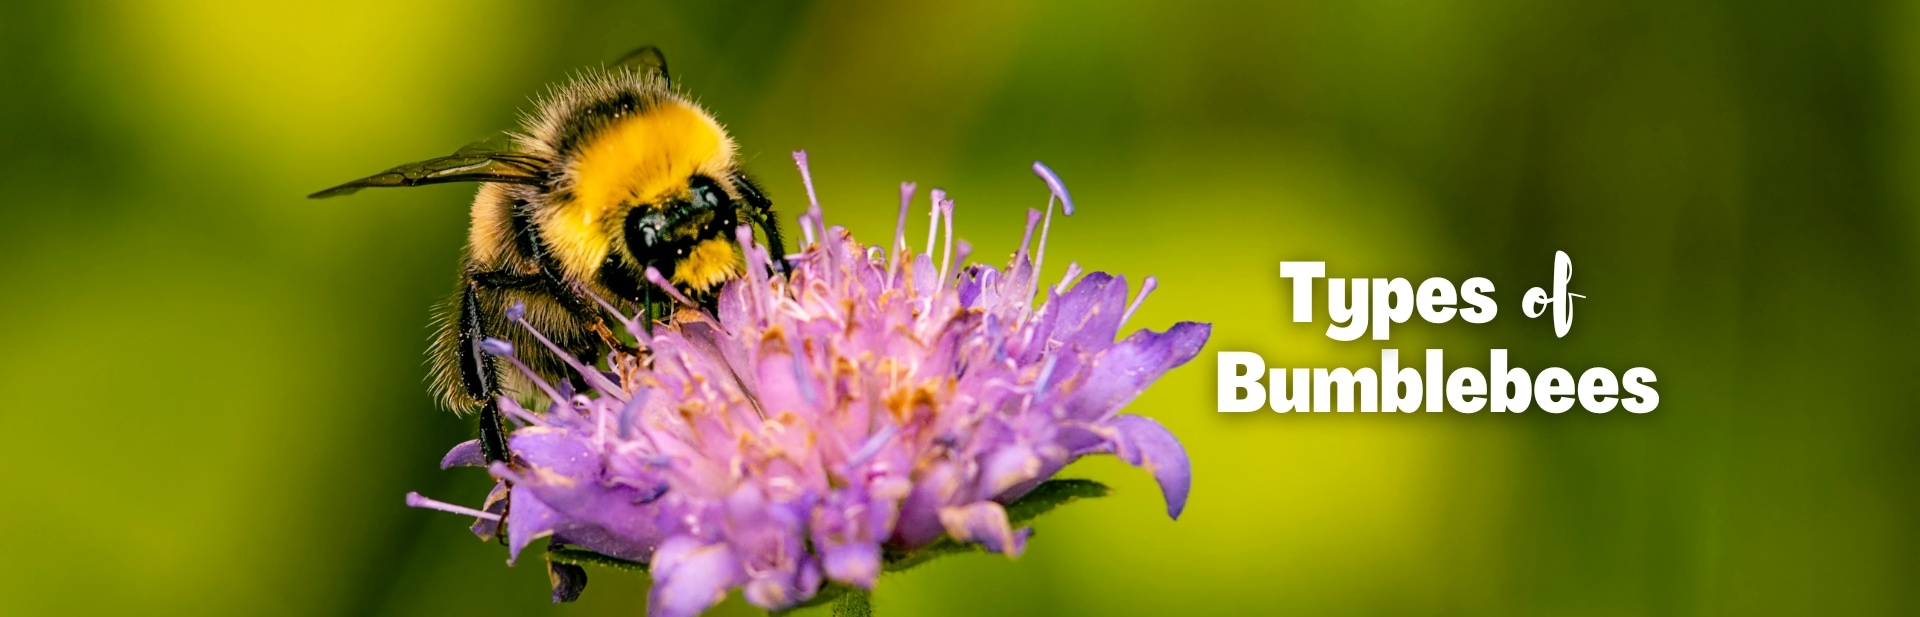 20 Types of Bumblebees to Look for in Your Backyard